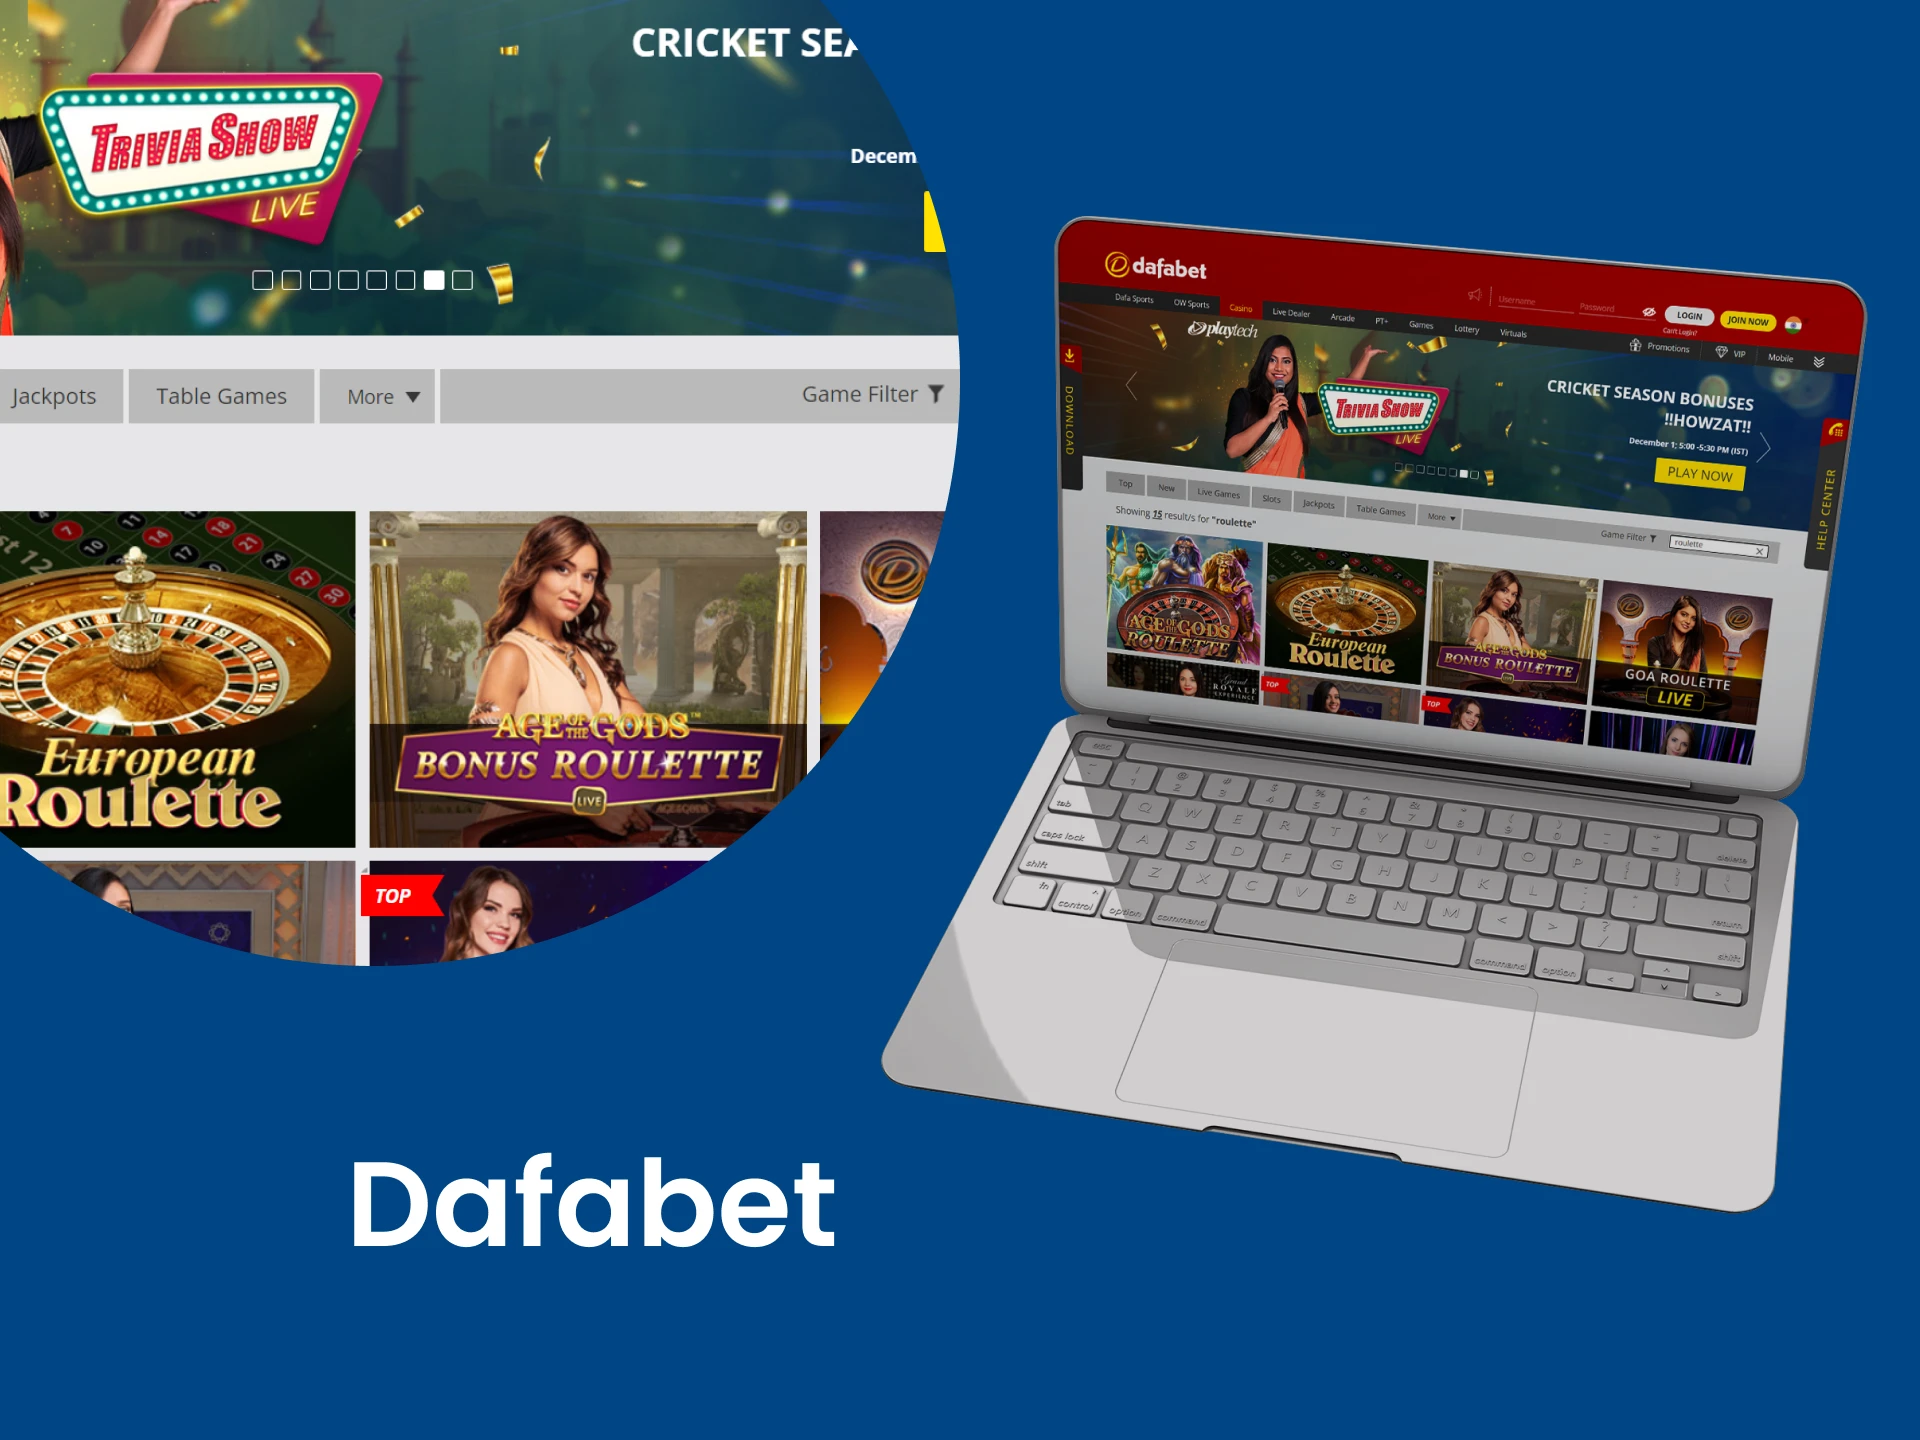 Dafabet is ideal for playing roulette.